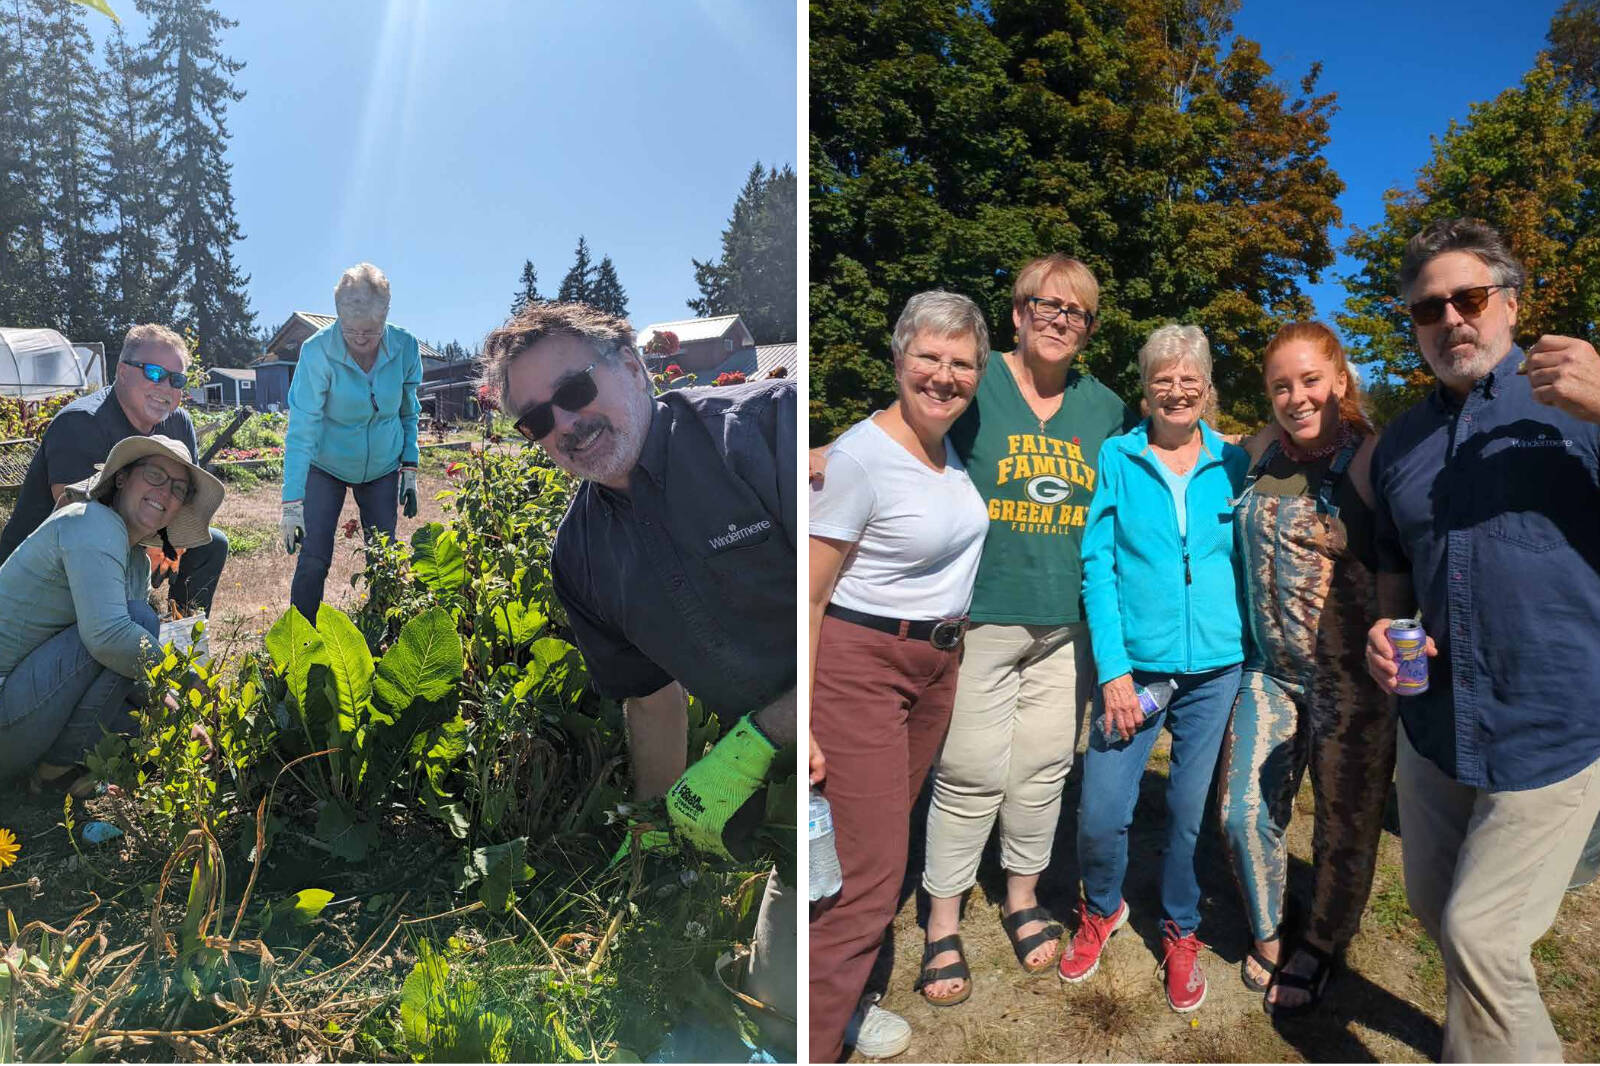 During their recent Community Service Day, the Windermere team volunteered with gardening, site maintenance, administration support and more at Good Cheer Food Bank and Donation Center.